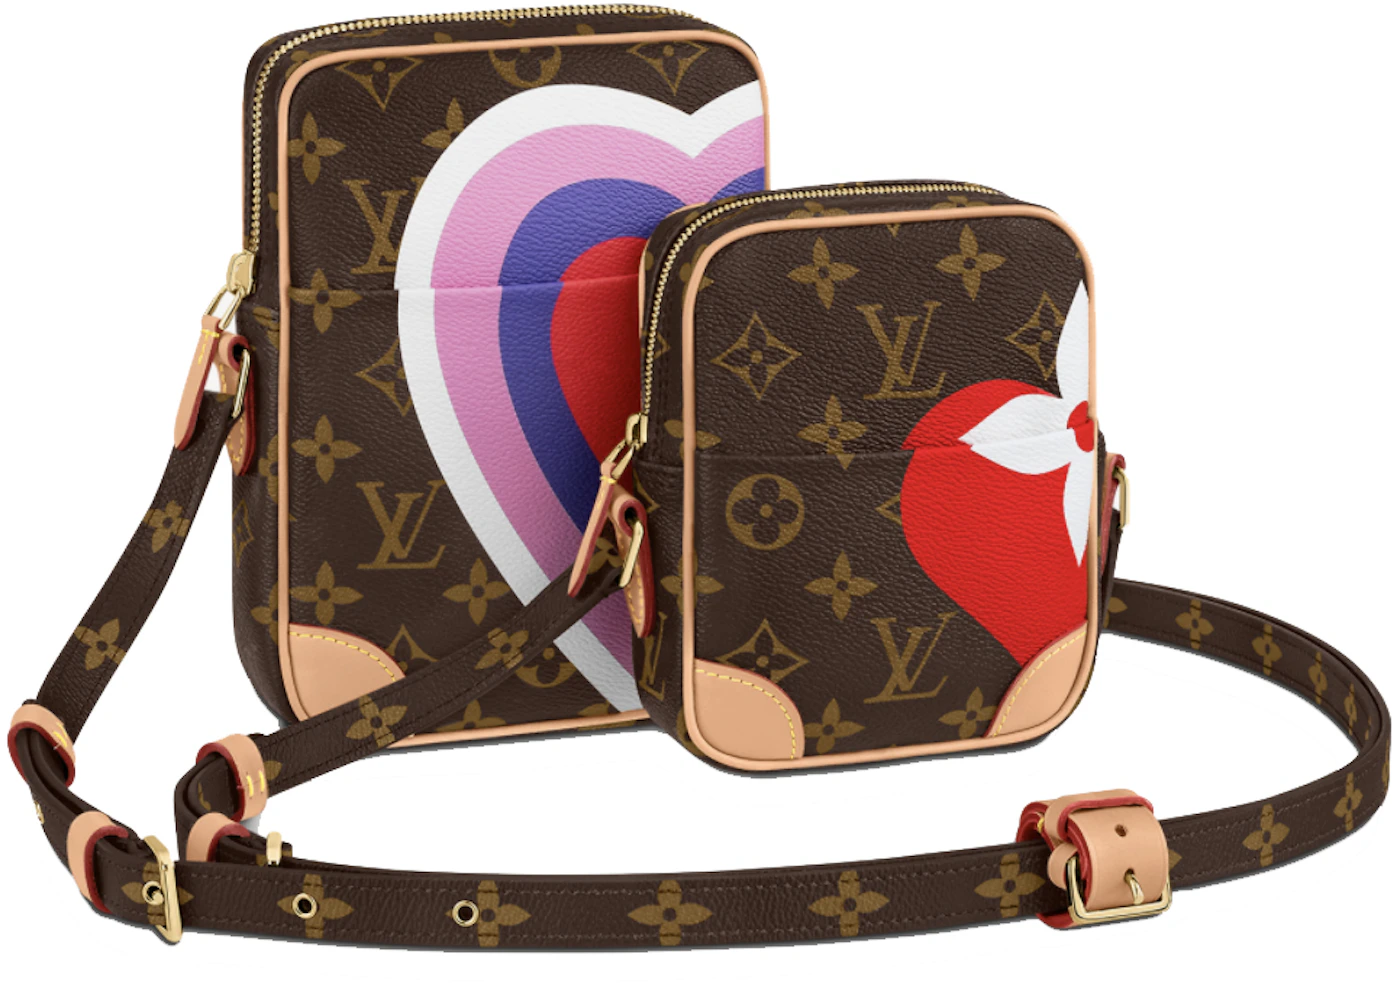 Buy Louis Vuitton Game On Accessories - StockX